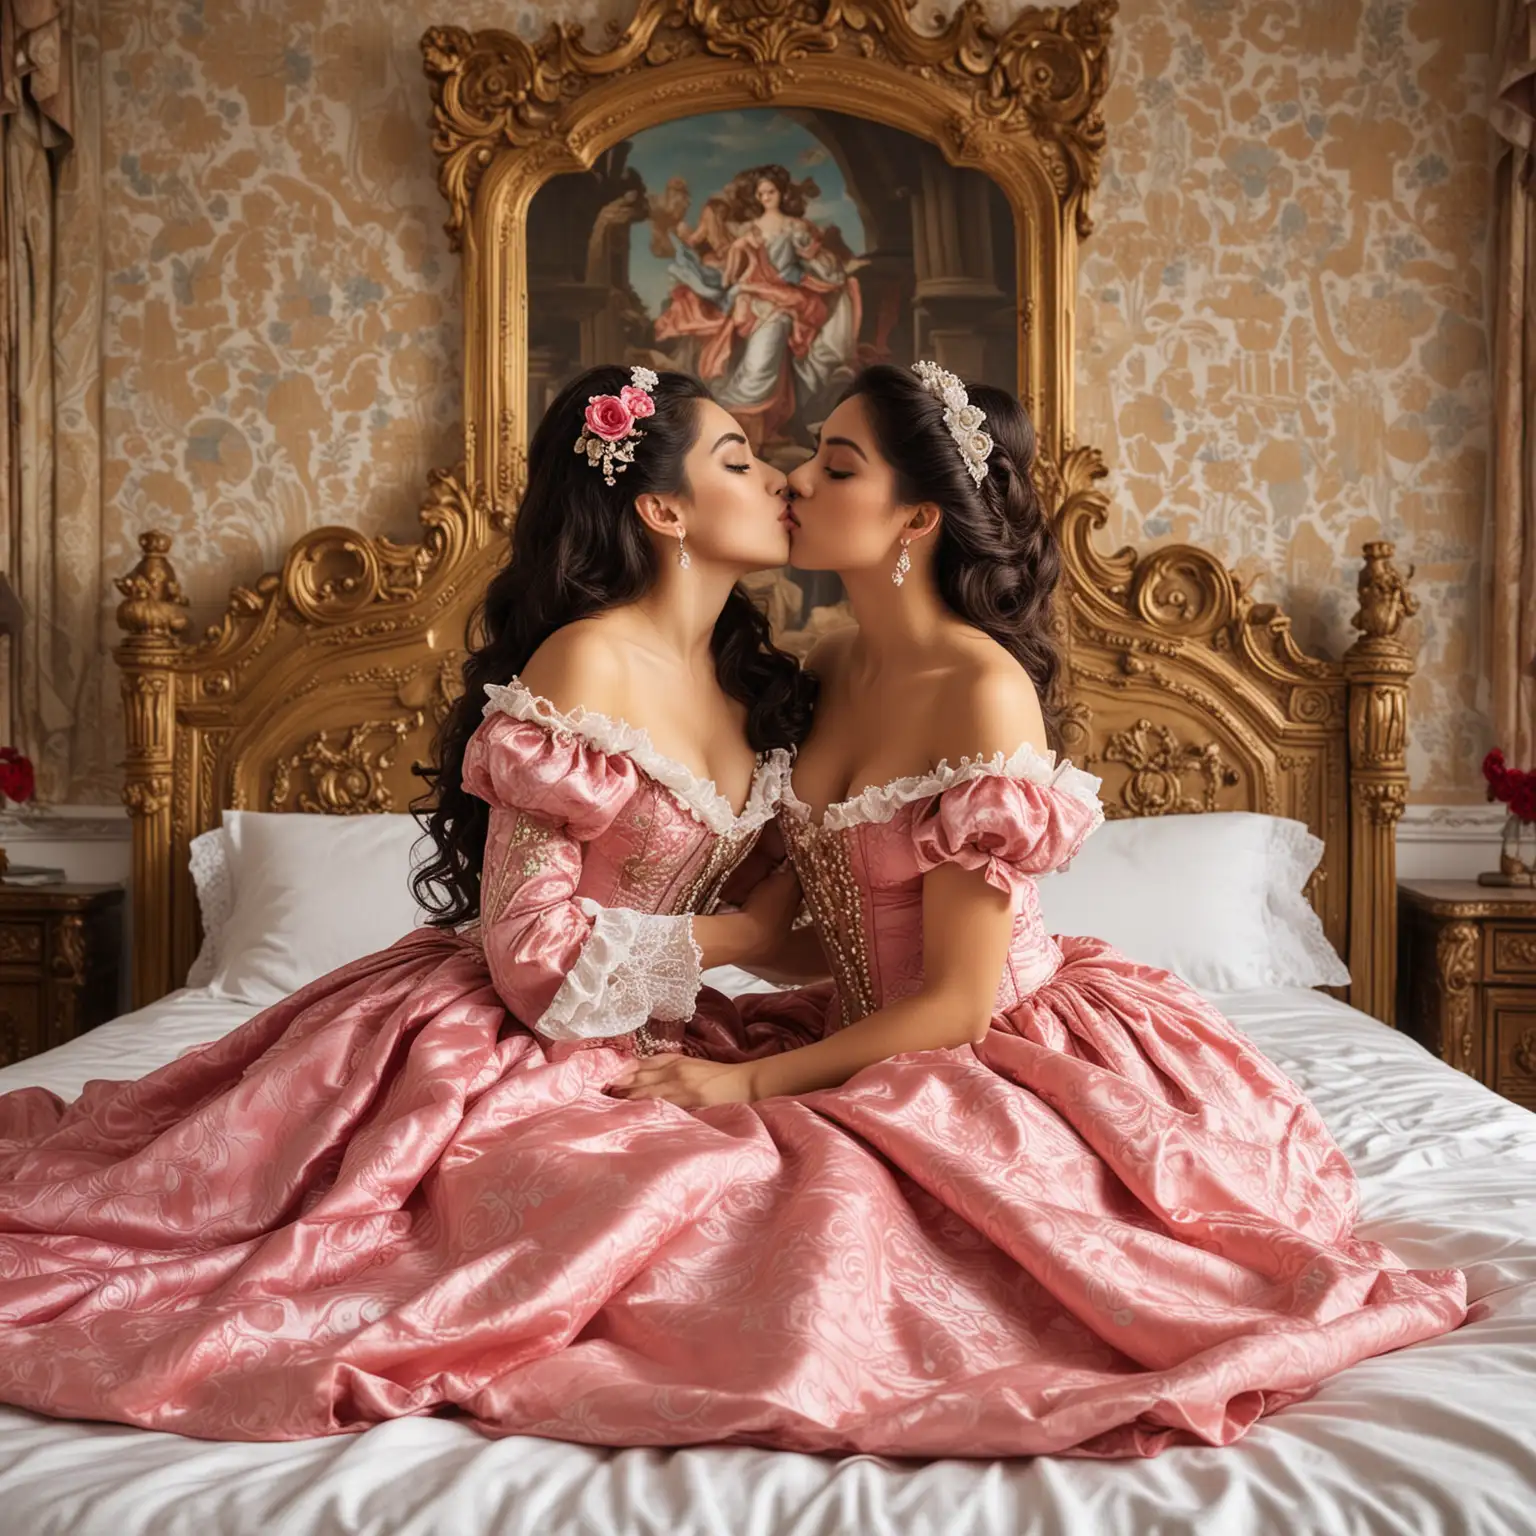 Mexican Beauties Sharing Intimate Moment on Ornate Bed